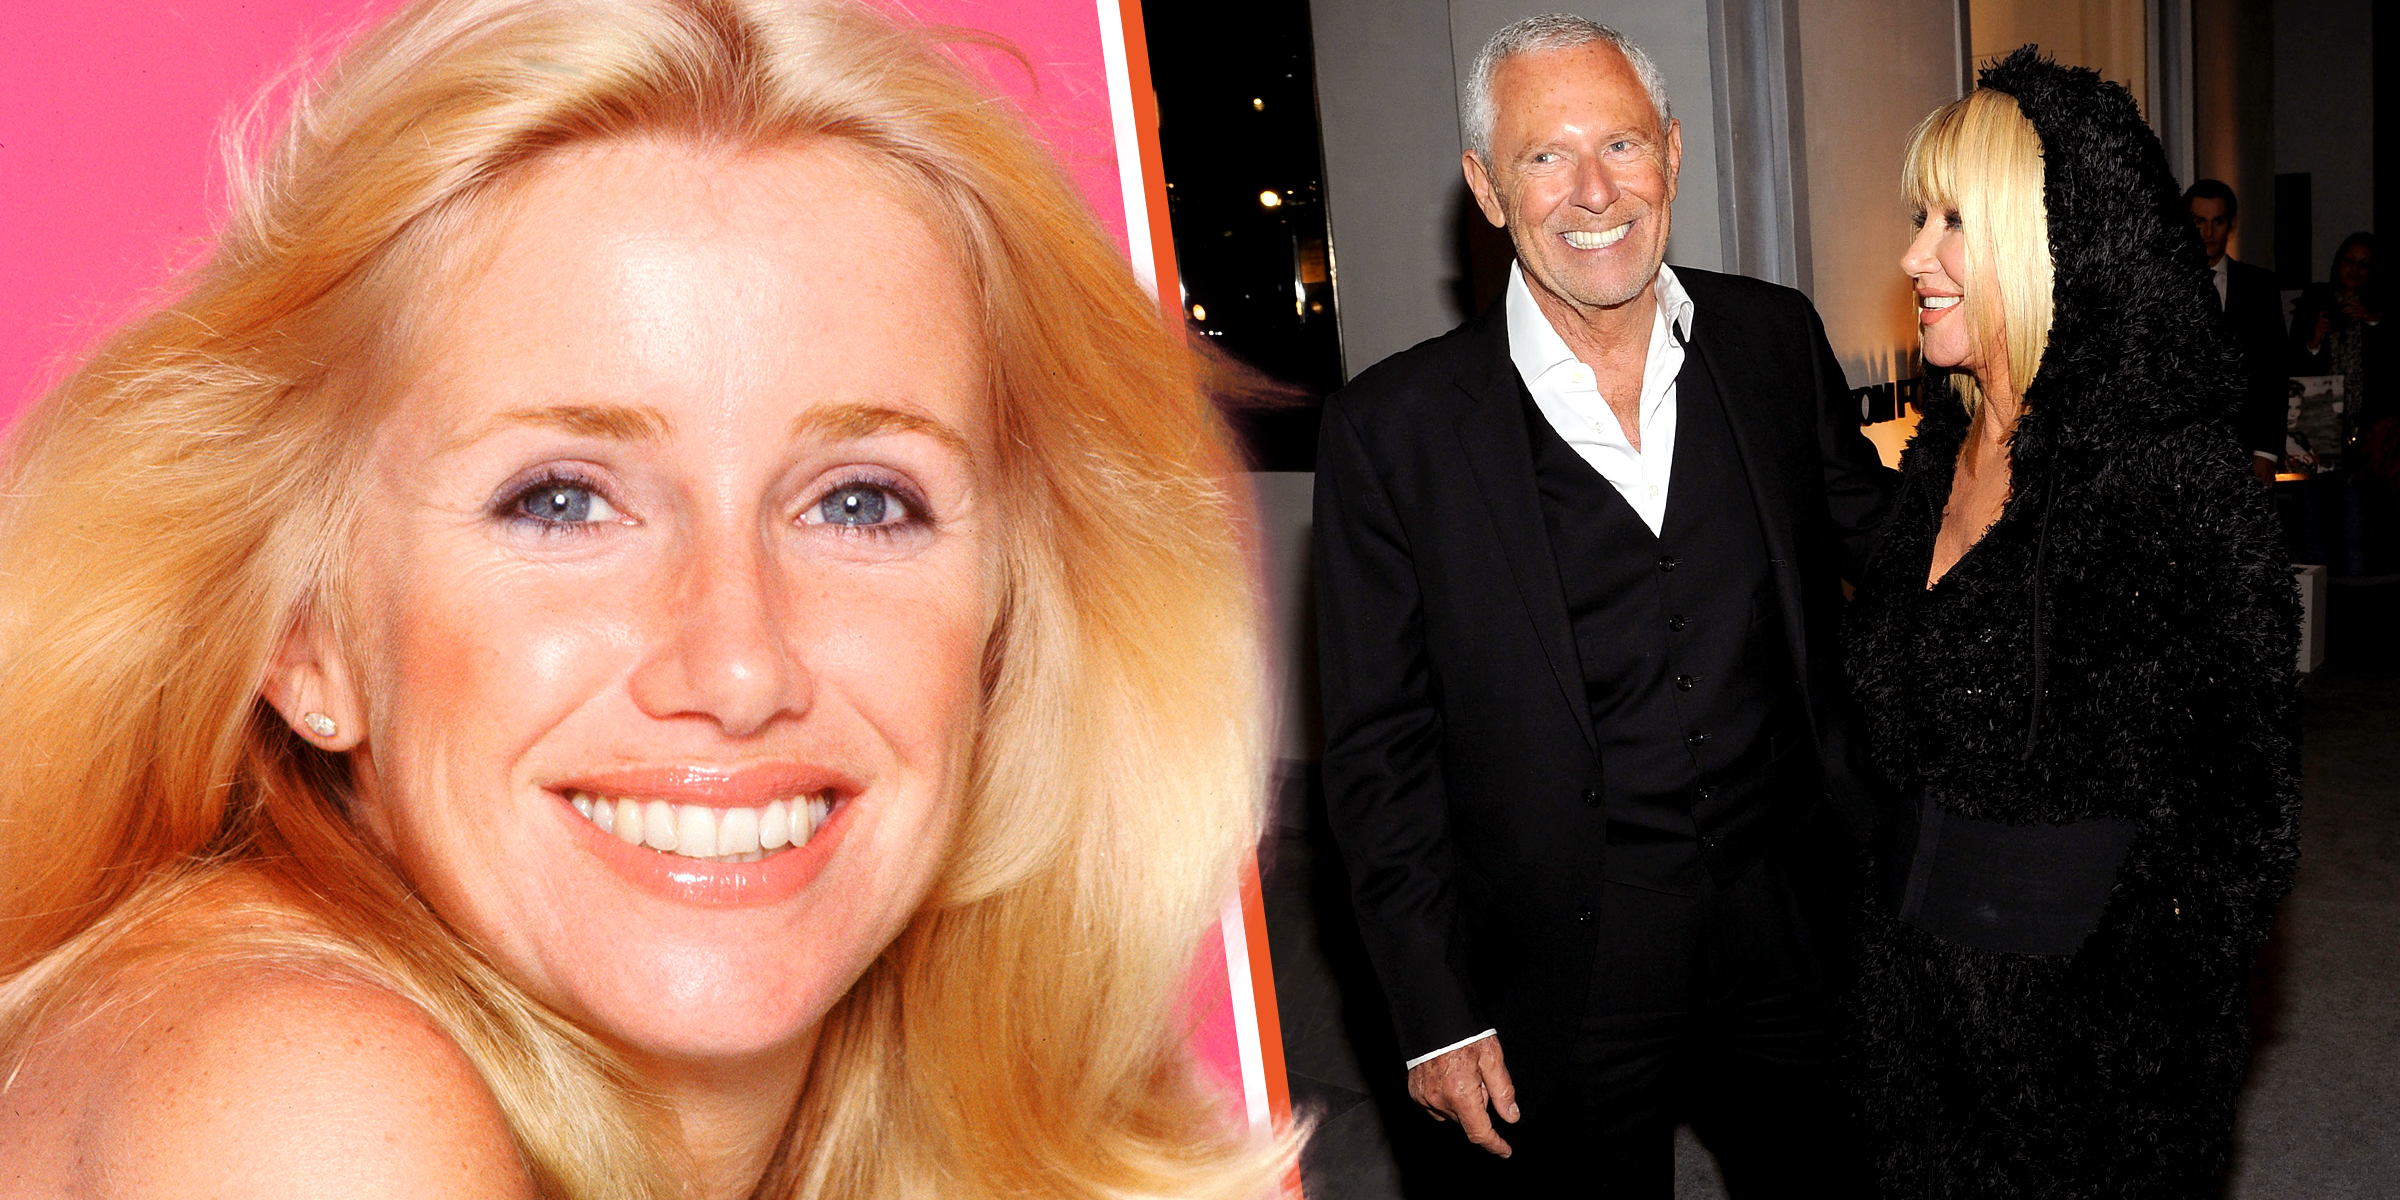 Suzanne Somers | Suzanne Somers and Alan Hamel Source: Getty Images